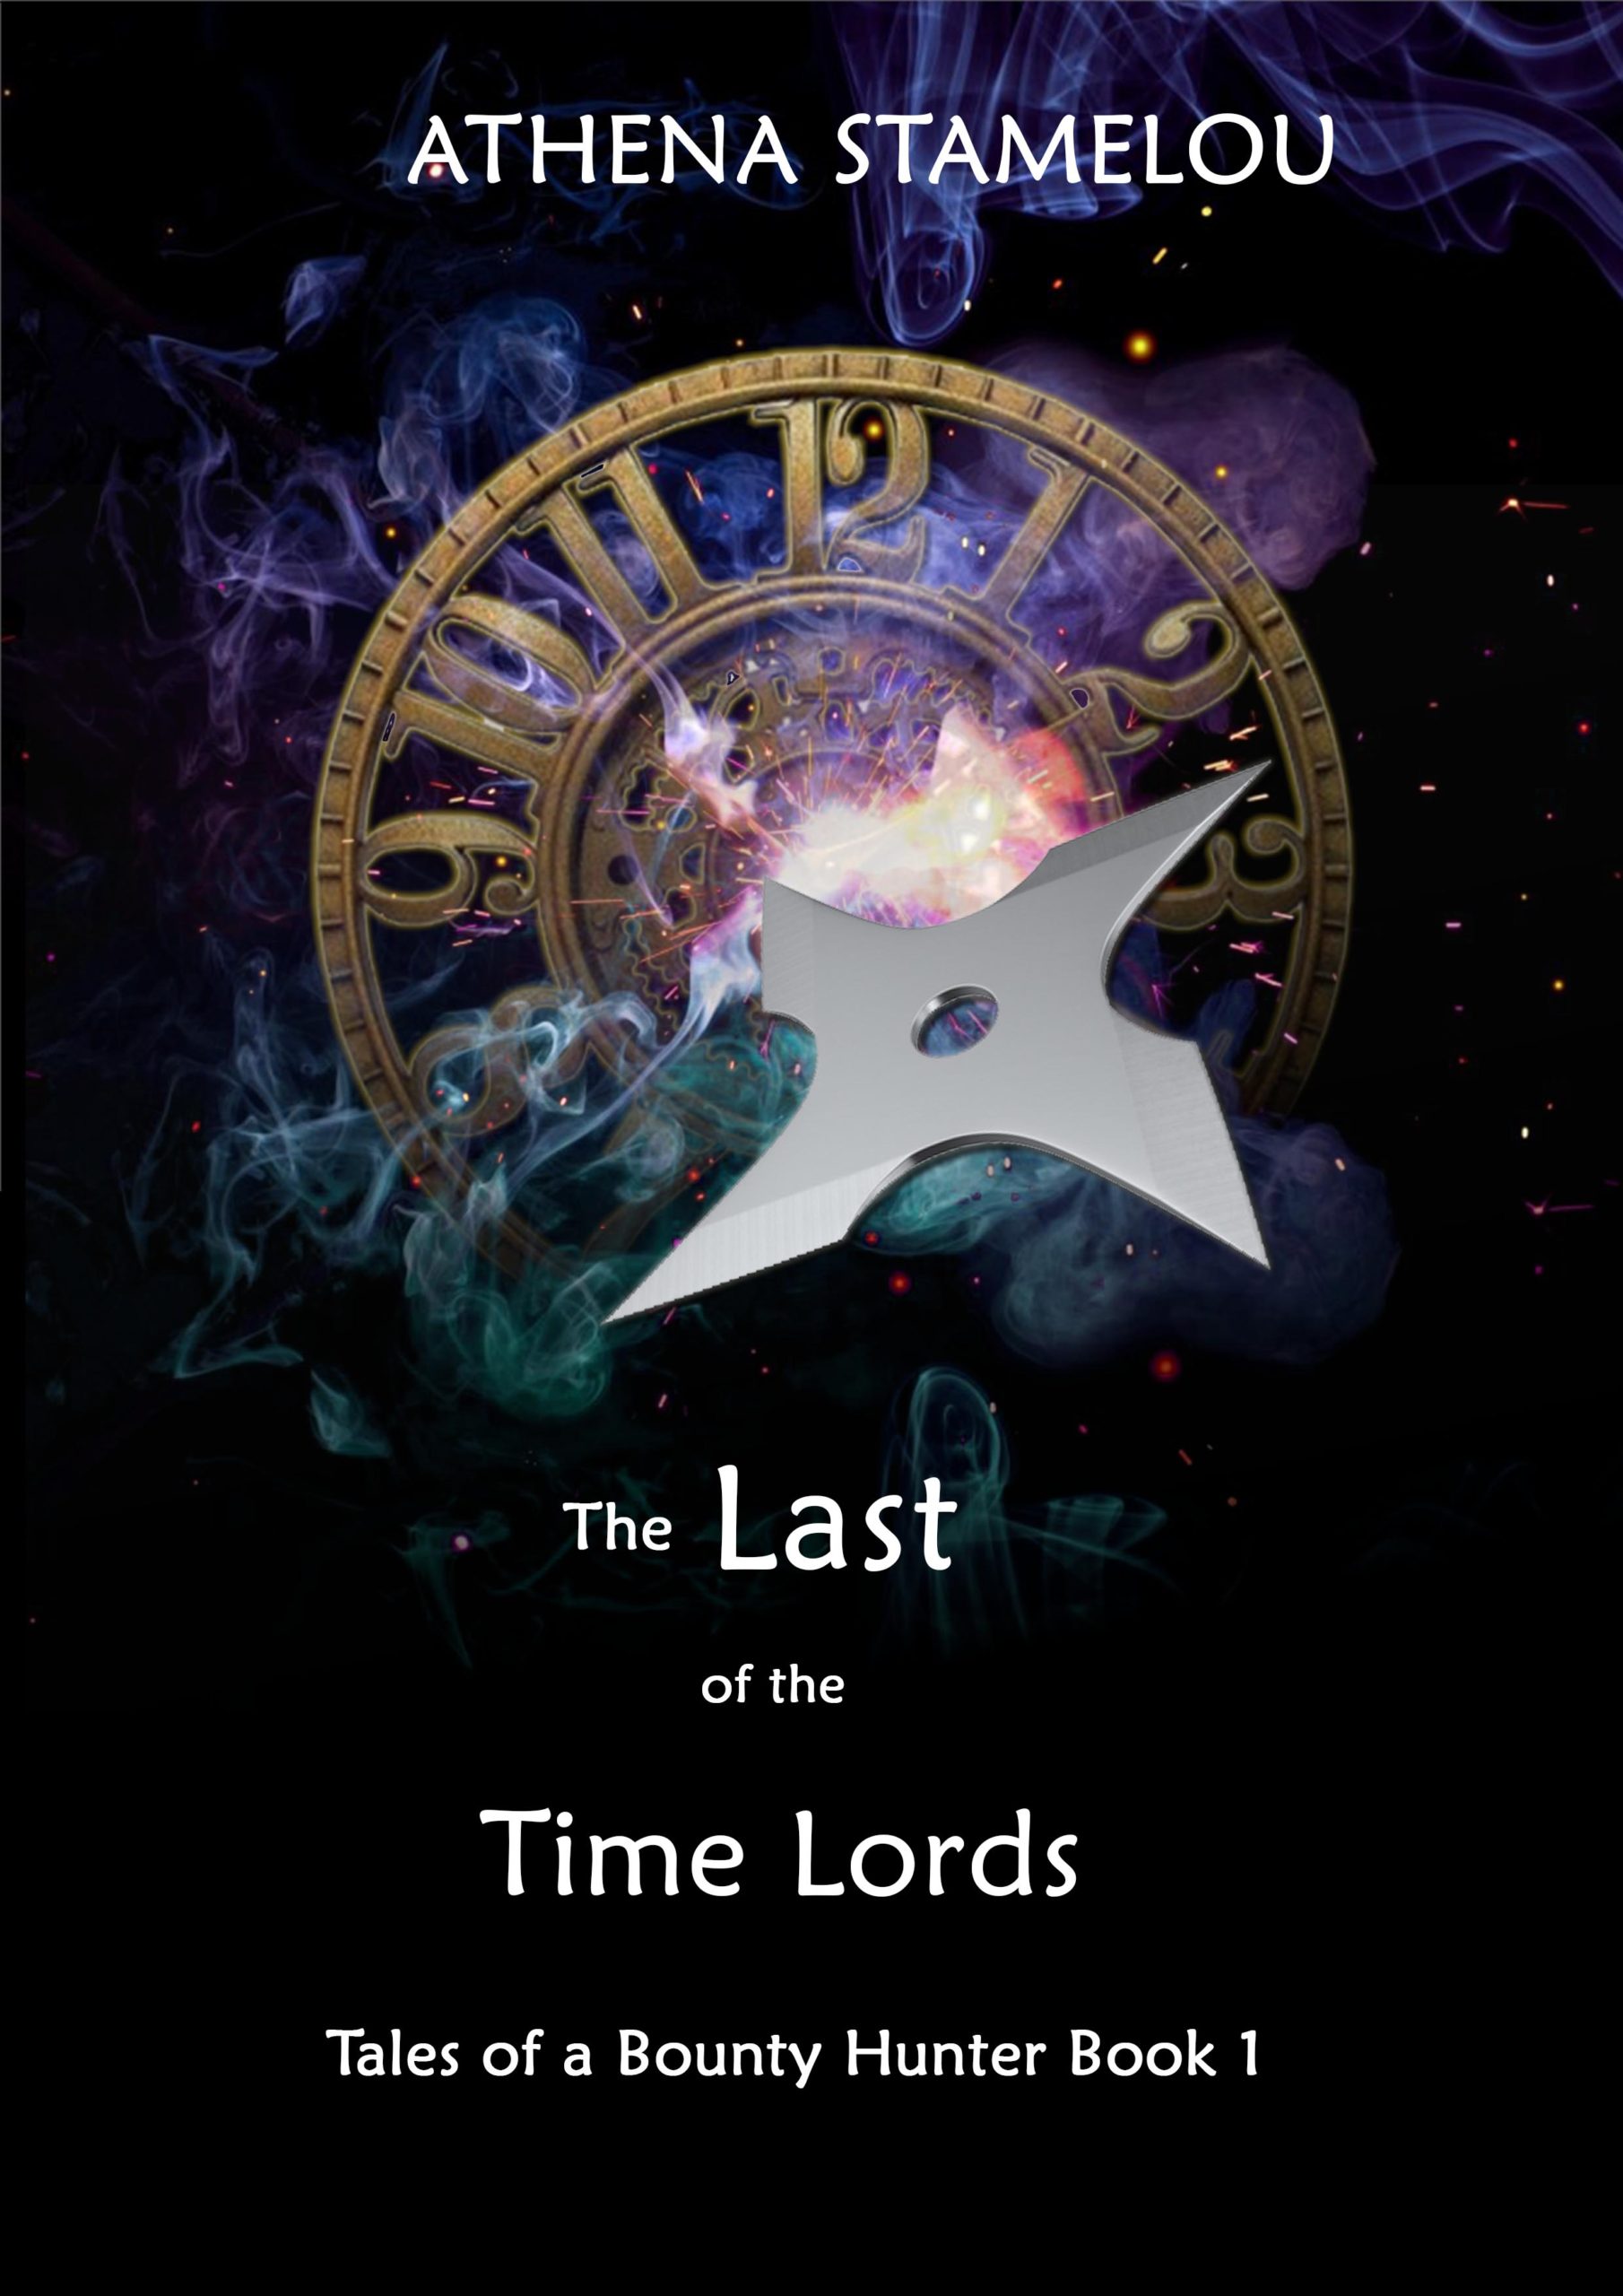 The Last of the Time Lords